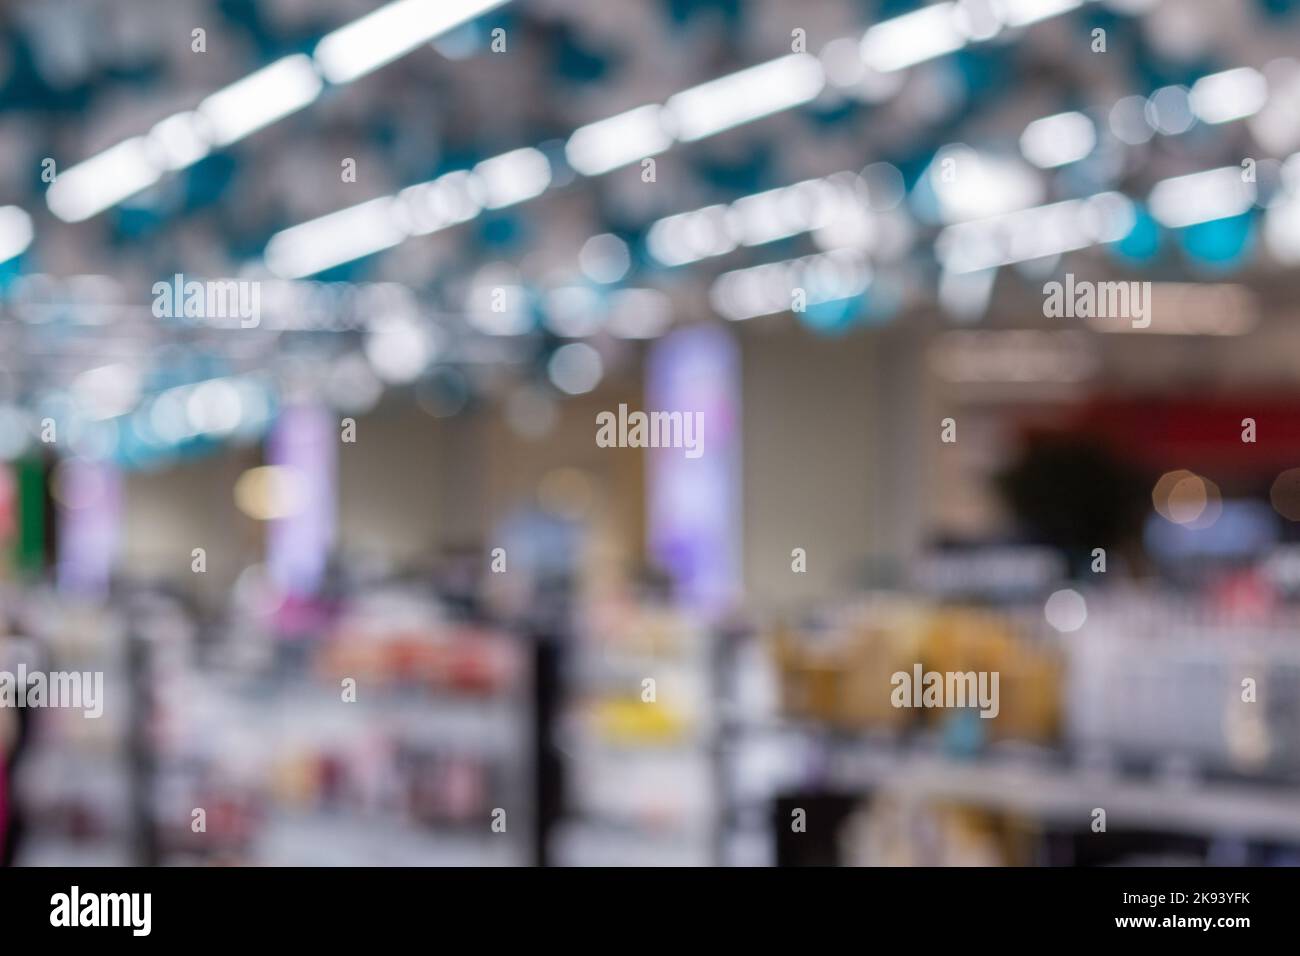 Blurred image a beauty stores with variety of prestige and mass cosmetics, makeup, fragrance, skincare, bath and body, hair care tools and salon, nail Stock Photo